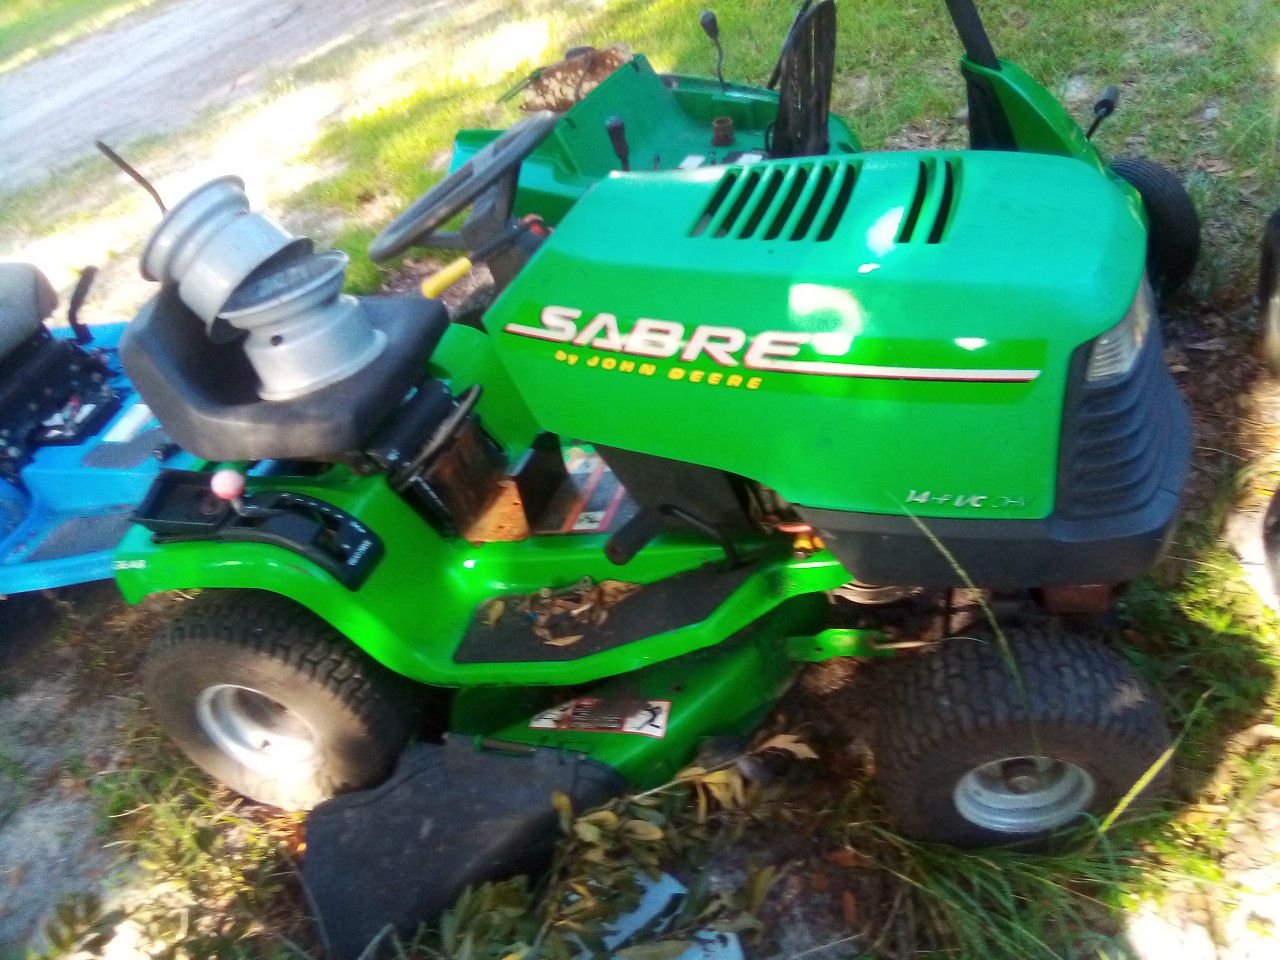 Lawn mowers and misc equipment for sale. For parts